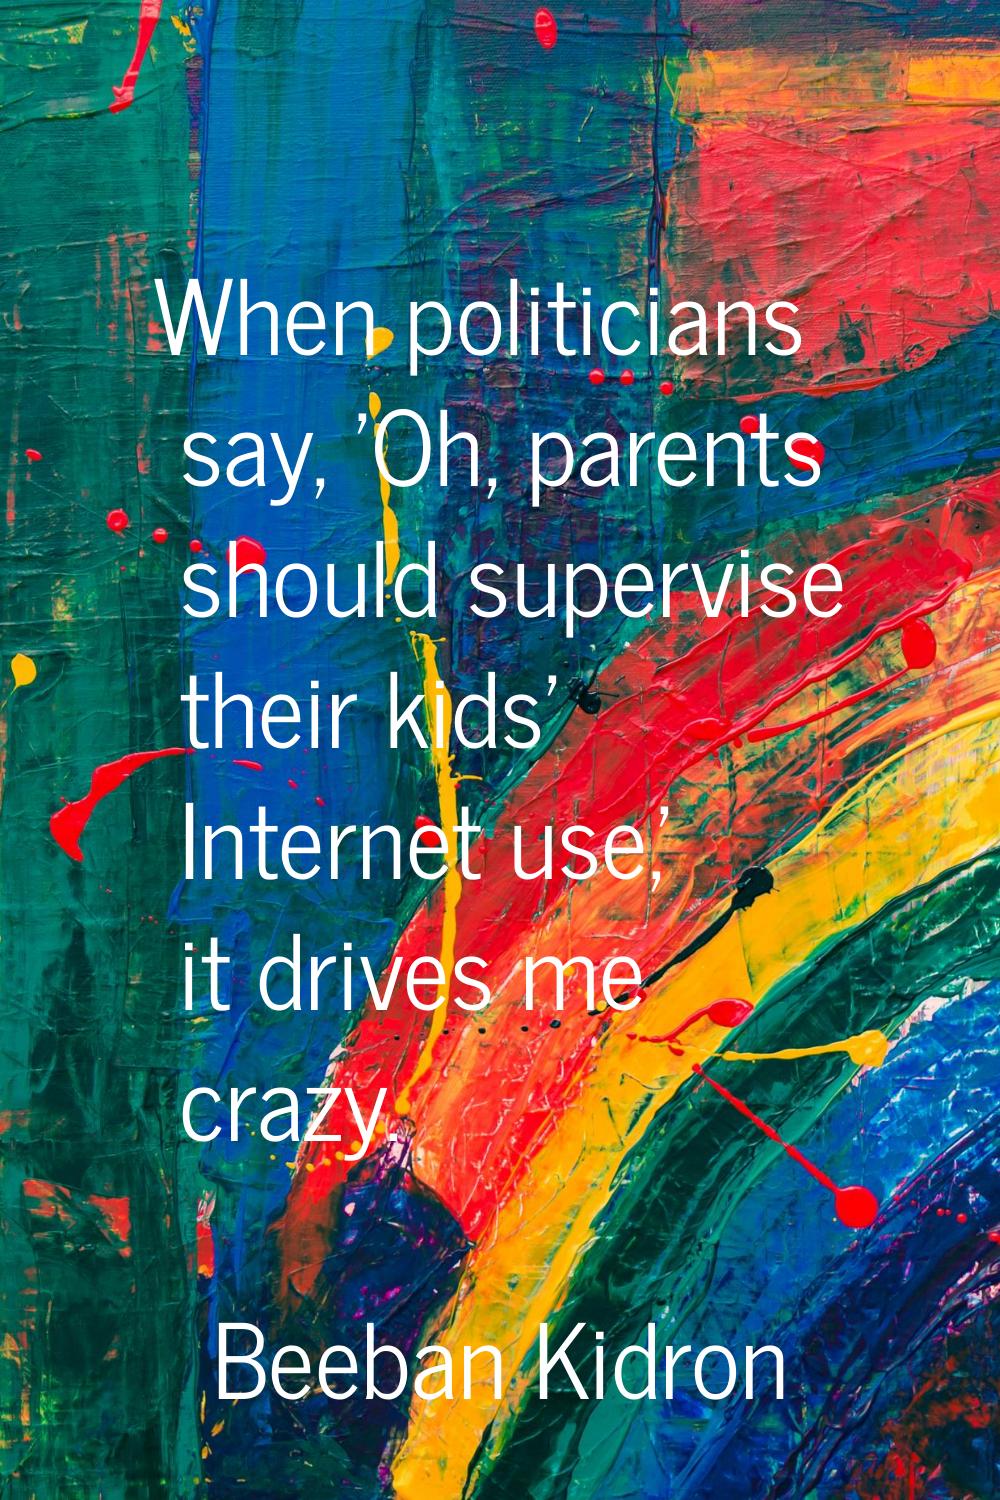 When politicians say, 'Oh, parents should supervise their kids' Internet use,' it drives me crazy.